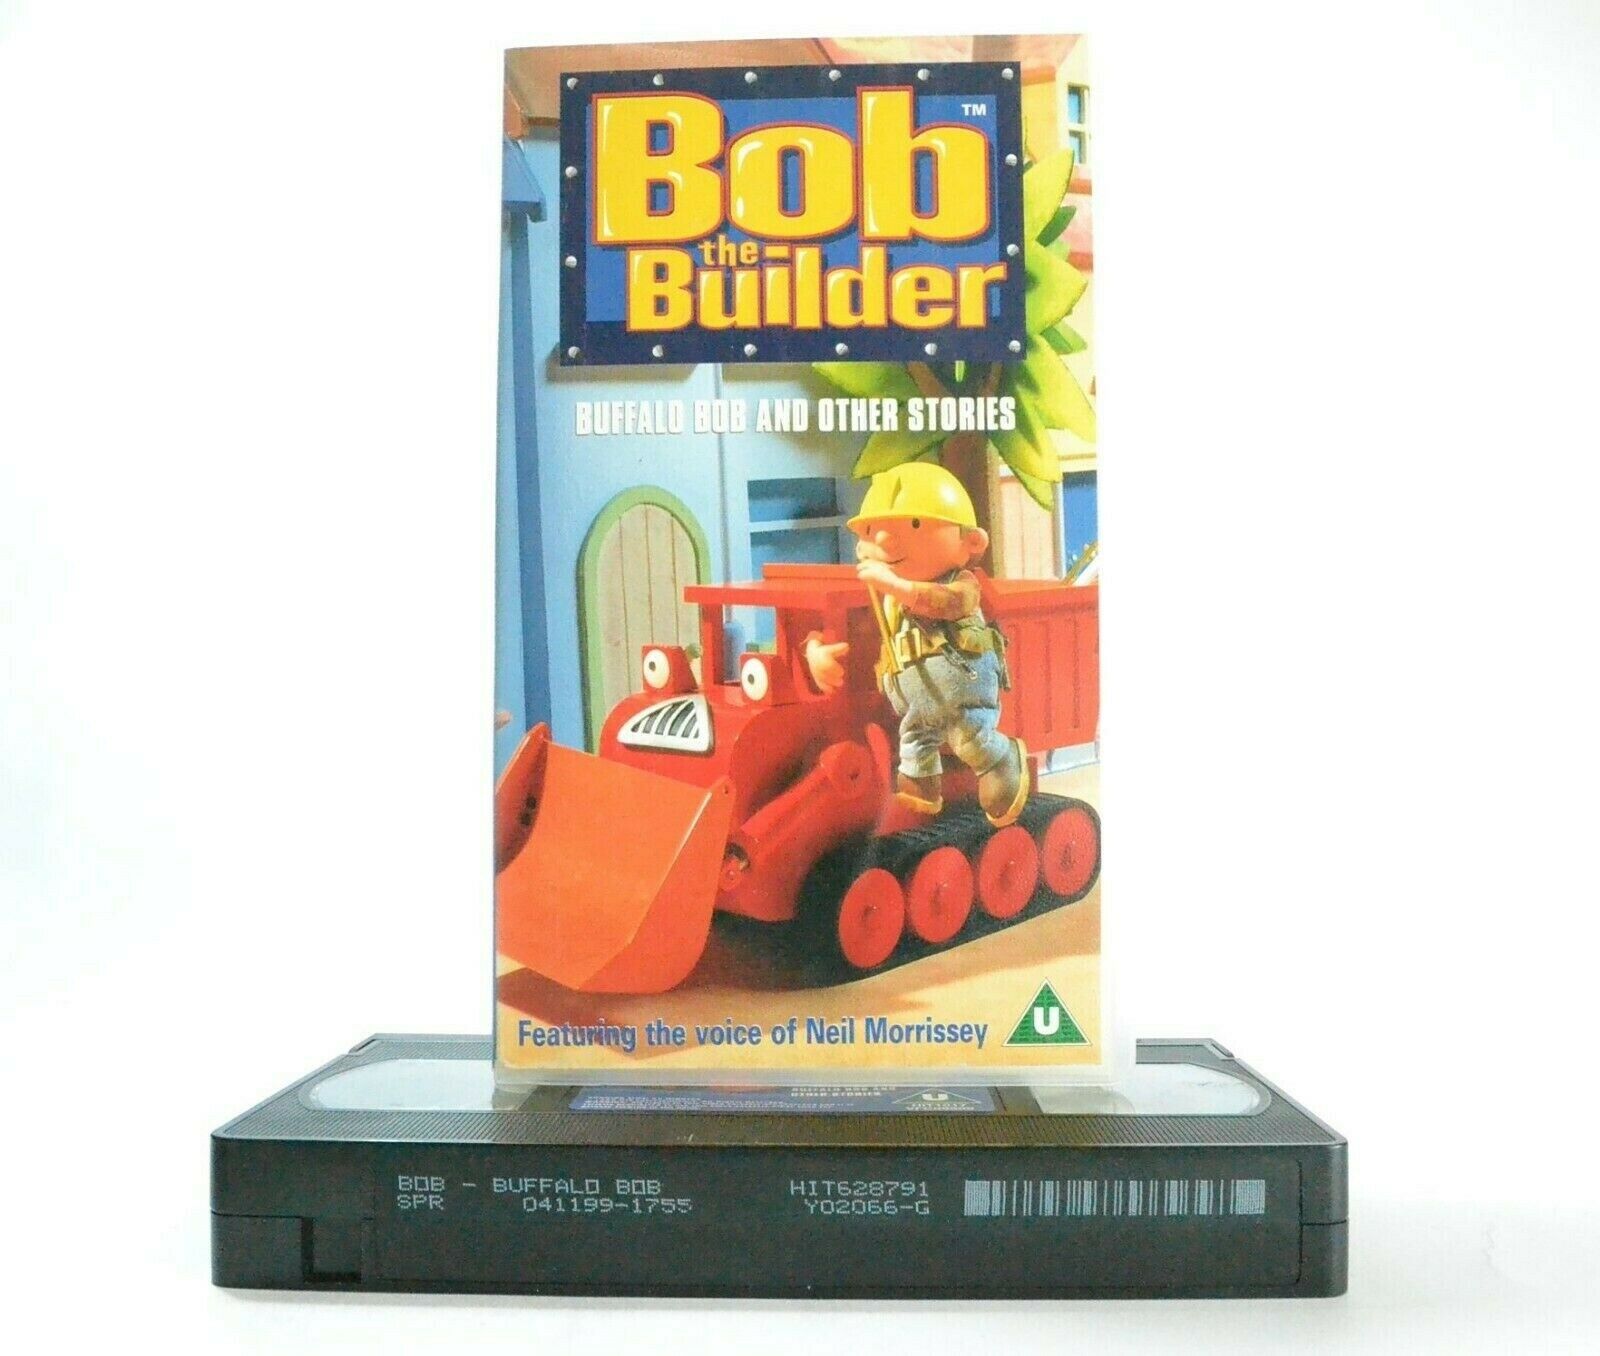 Bob The Builder: Buffalo Bob And Other Stories - Classic Children's Series - VHS-